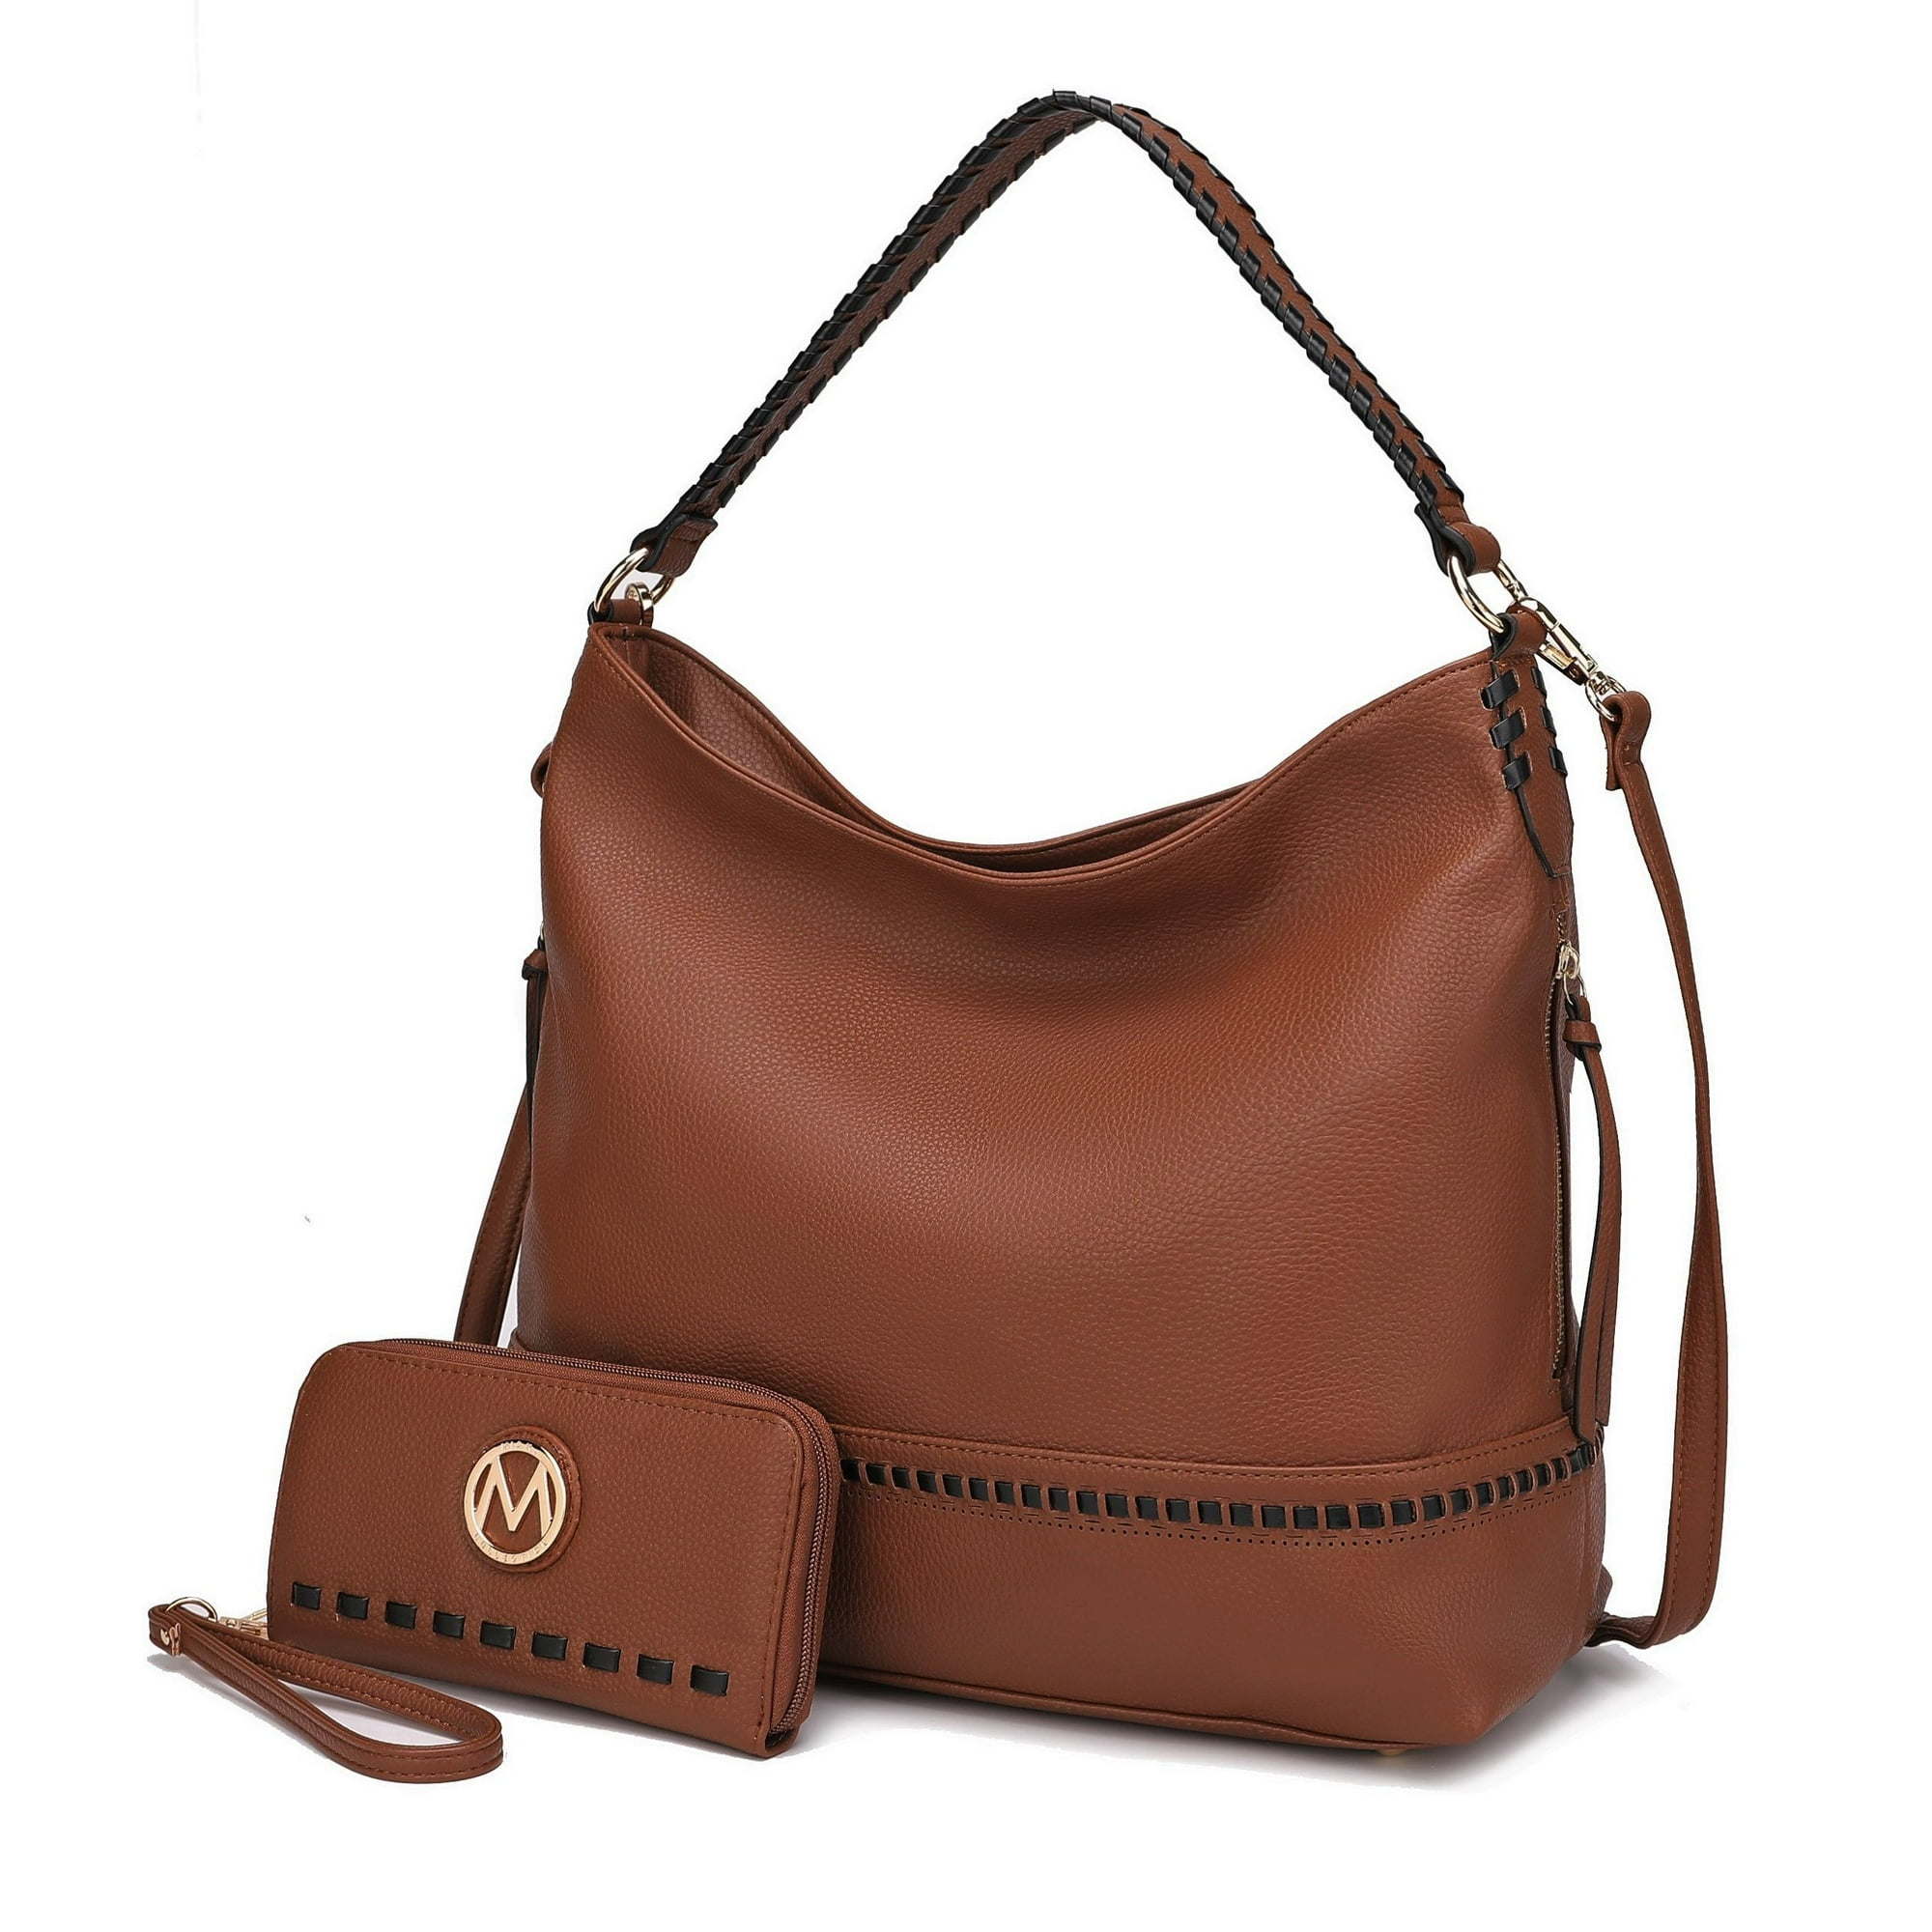 MKF Collection - Blake two-tone whip stitches Vegan Leather Shoulder bag with Wallet by Mia, Cognac 3P's Inclusive Beauty